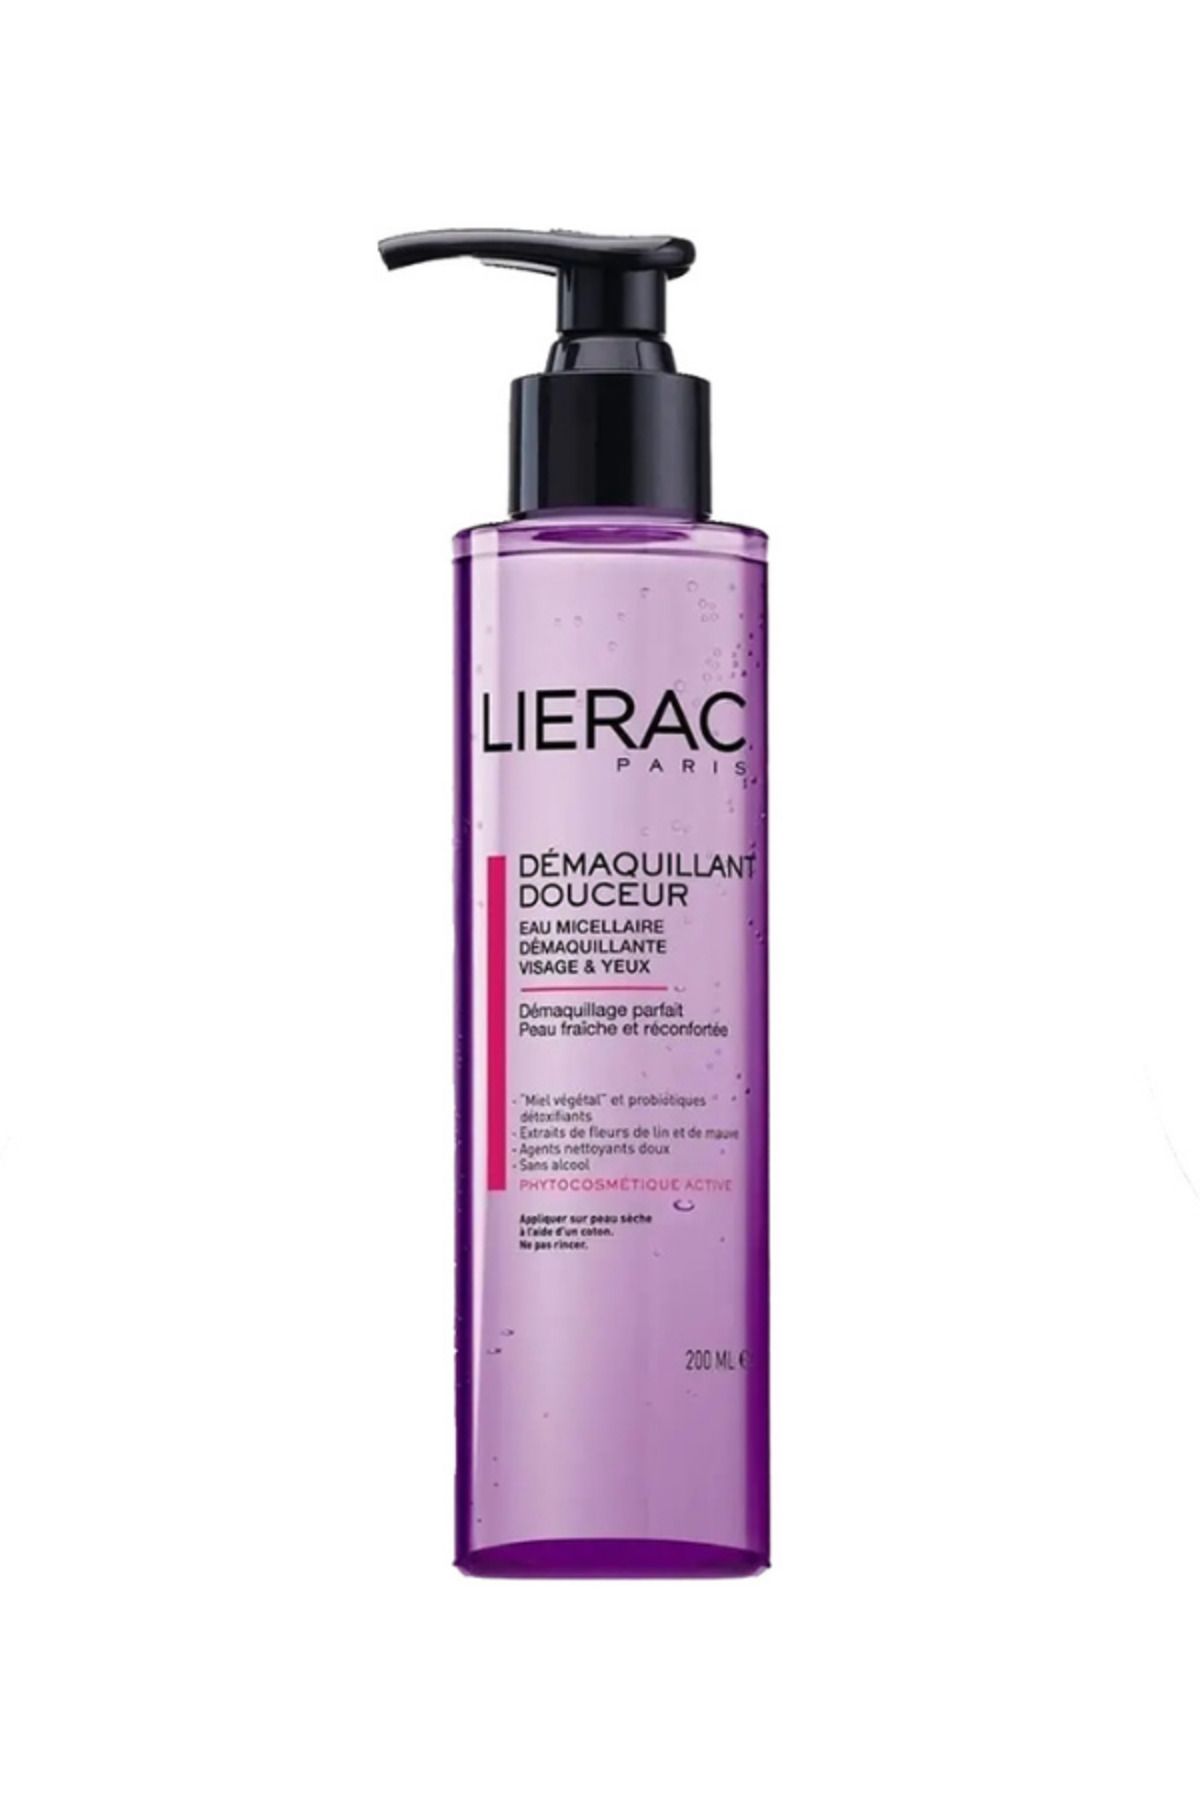 Lierac THE MİCELLAR WATER FACİAL CLEANSİNG WATER 200 ML (REMOVES MAKE-UP, MOİSTURİZES) PSSN1587